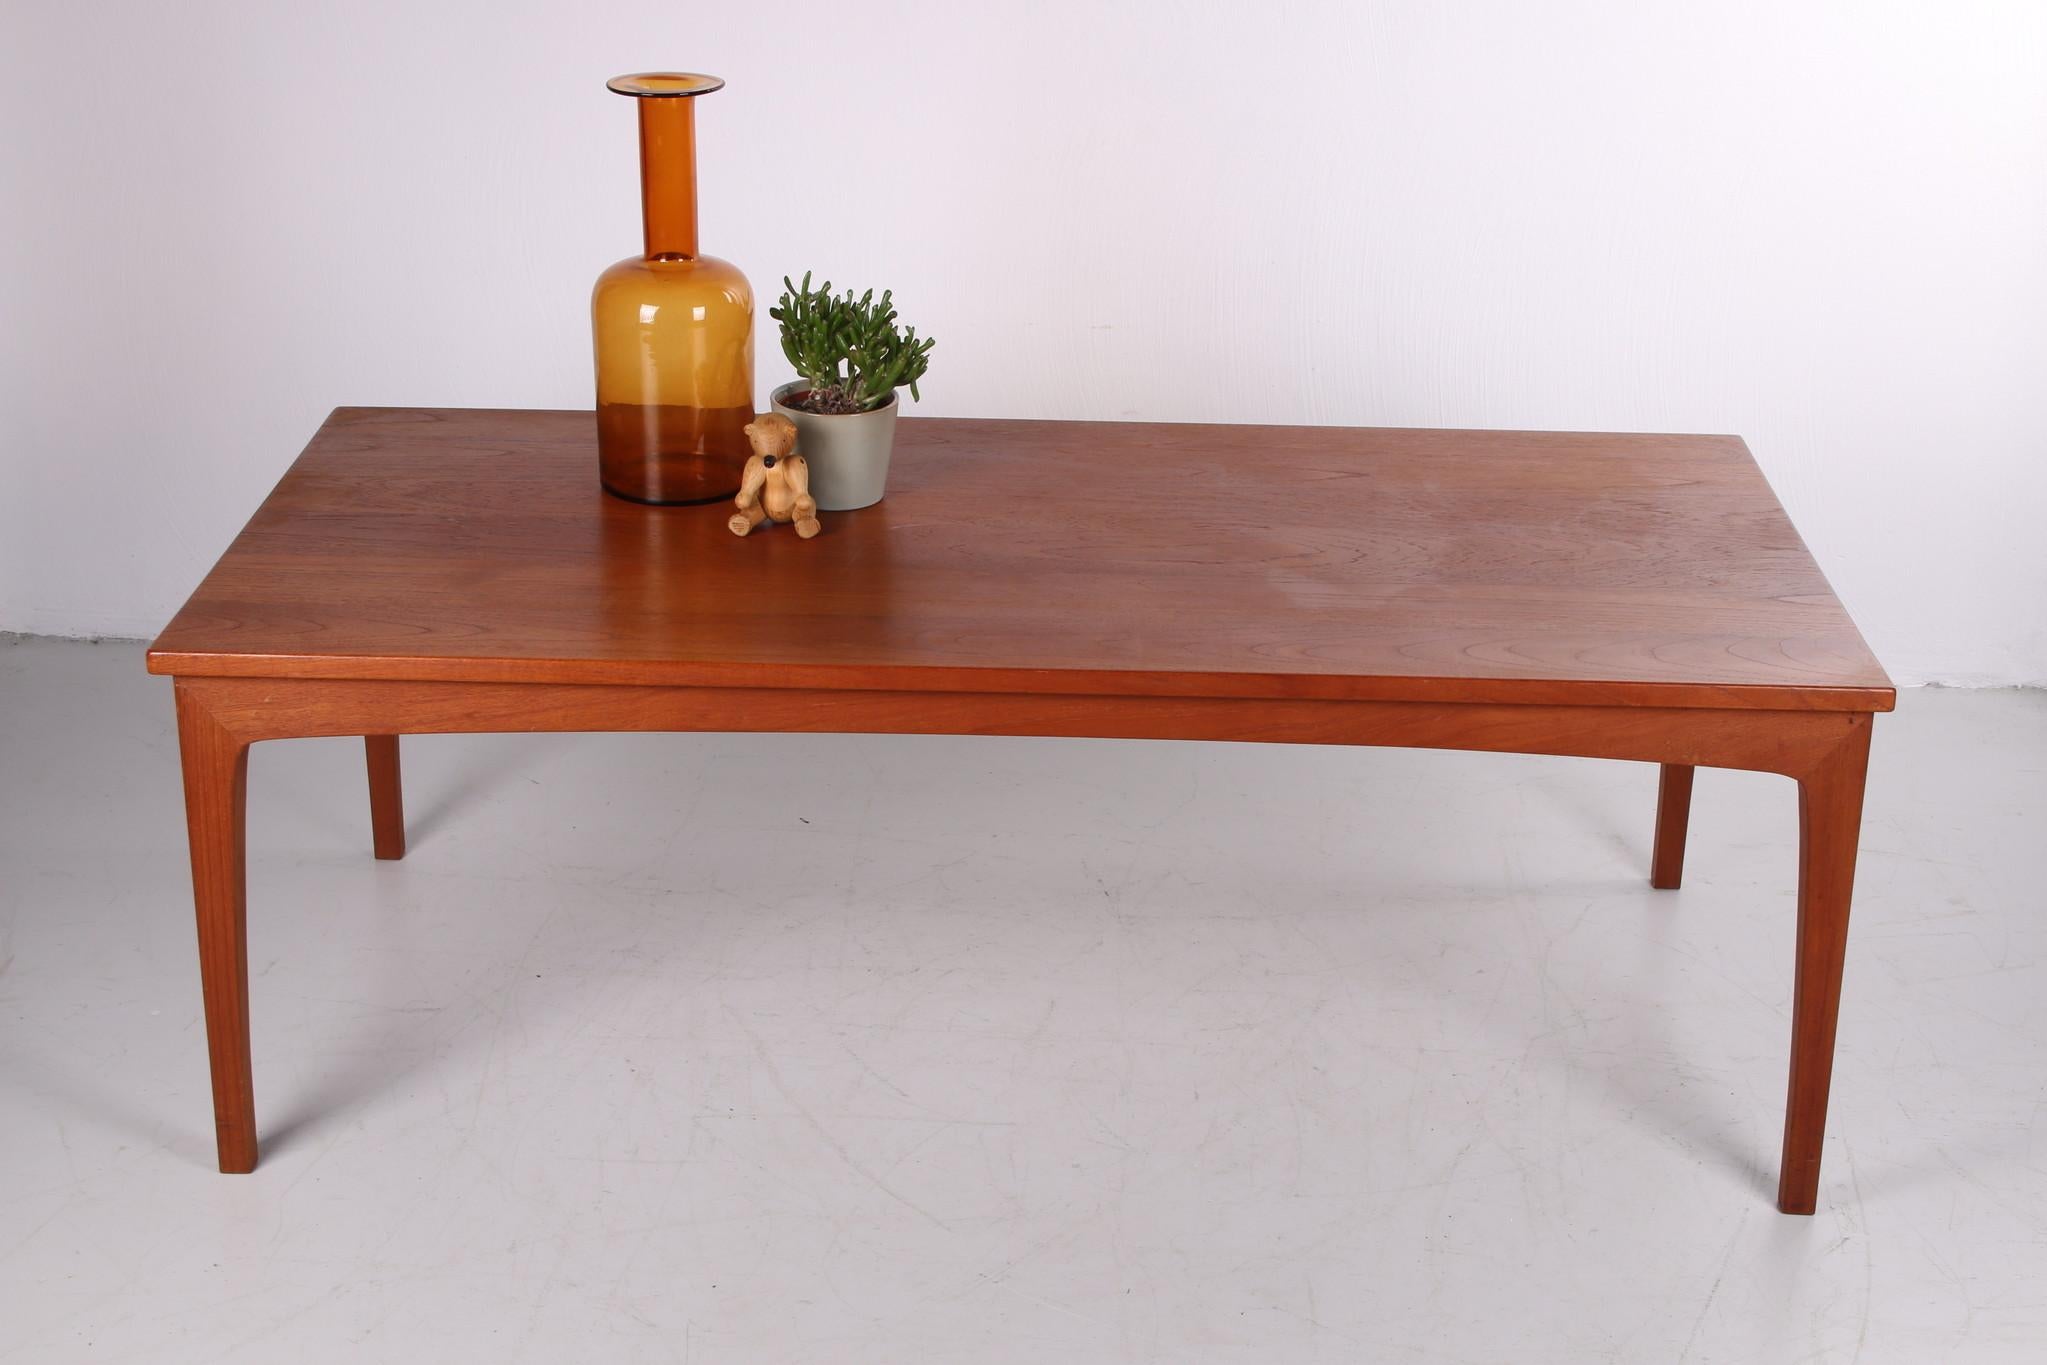 Danish Design Coffee Table from solid Teak design by Niels Bach 1960 For Sale 4